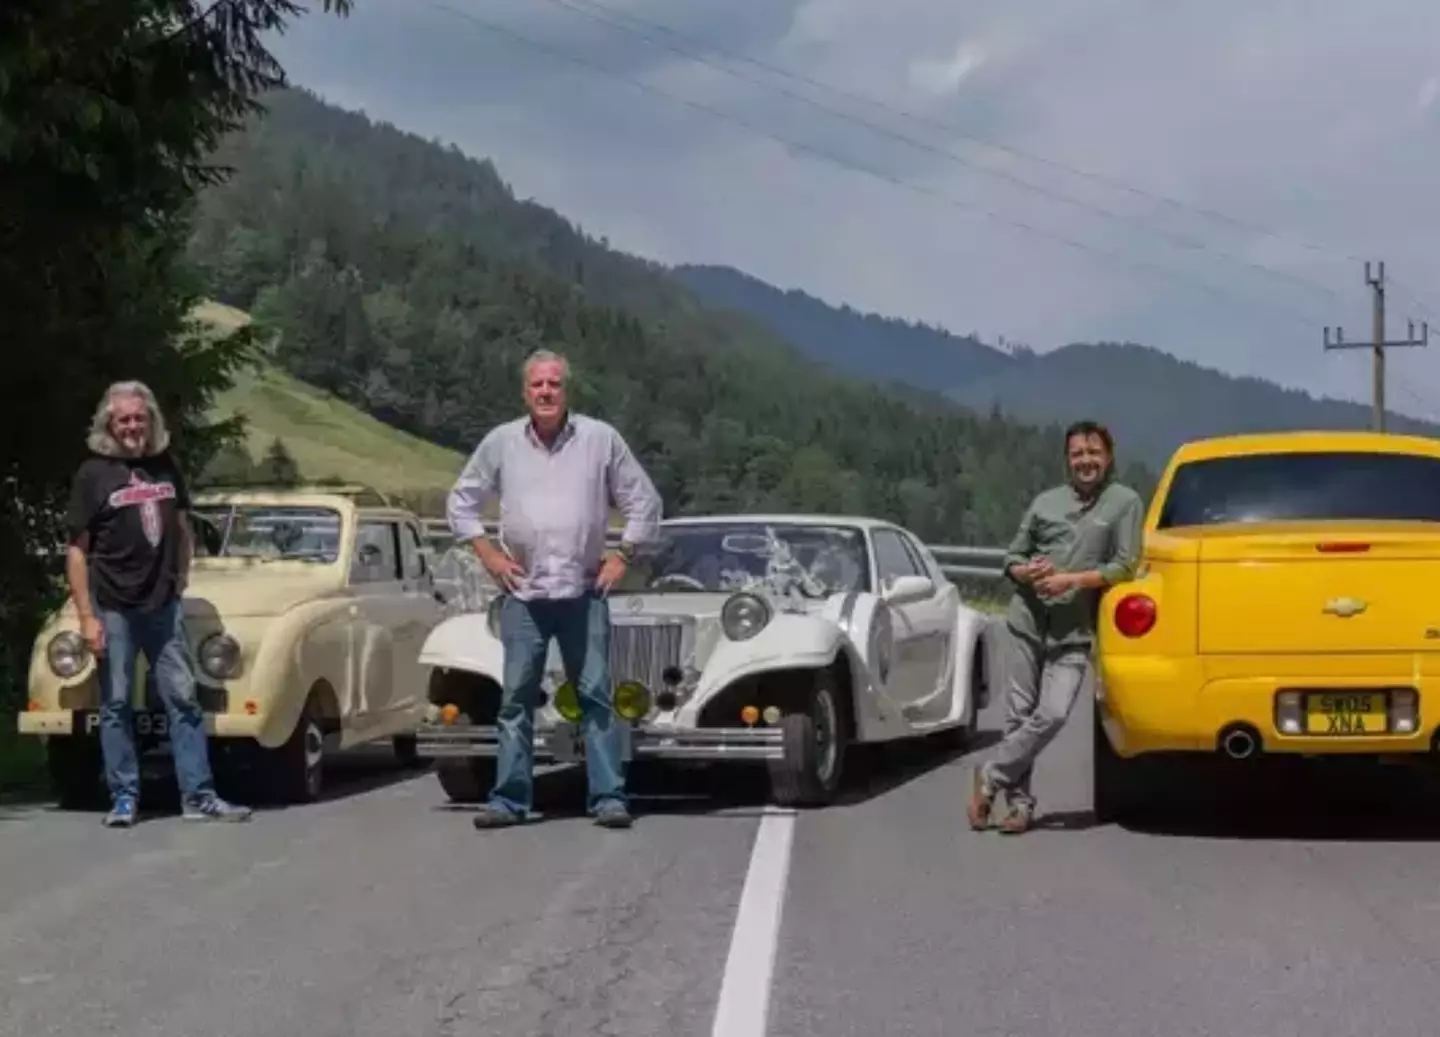 James May, Jeremy Clarkson and Richard Hammond had a joke planned in case one of them died during filming.